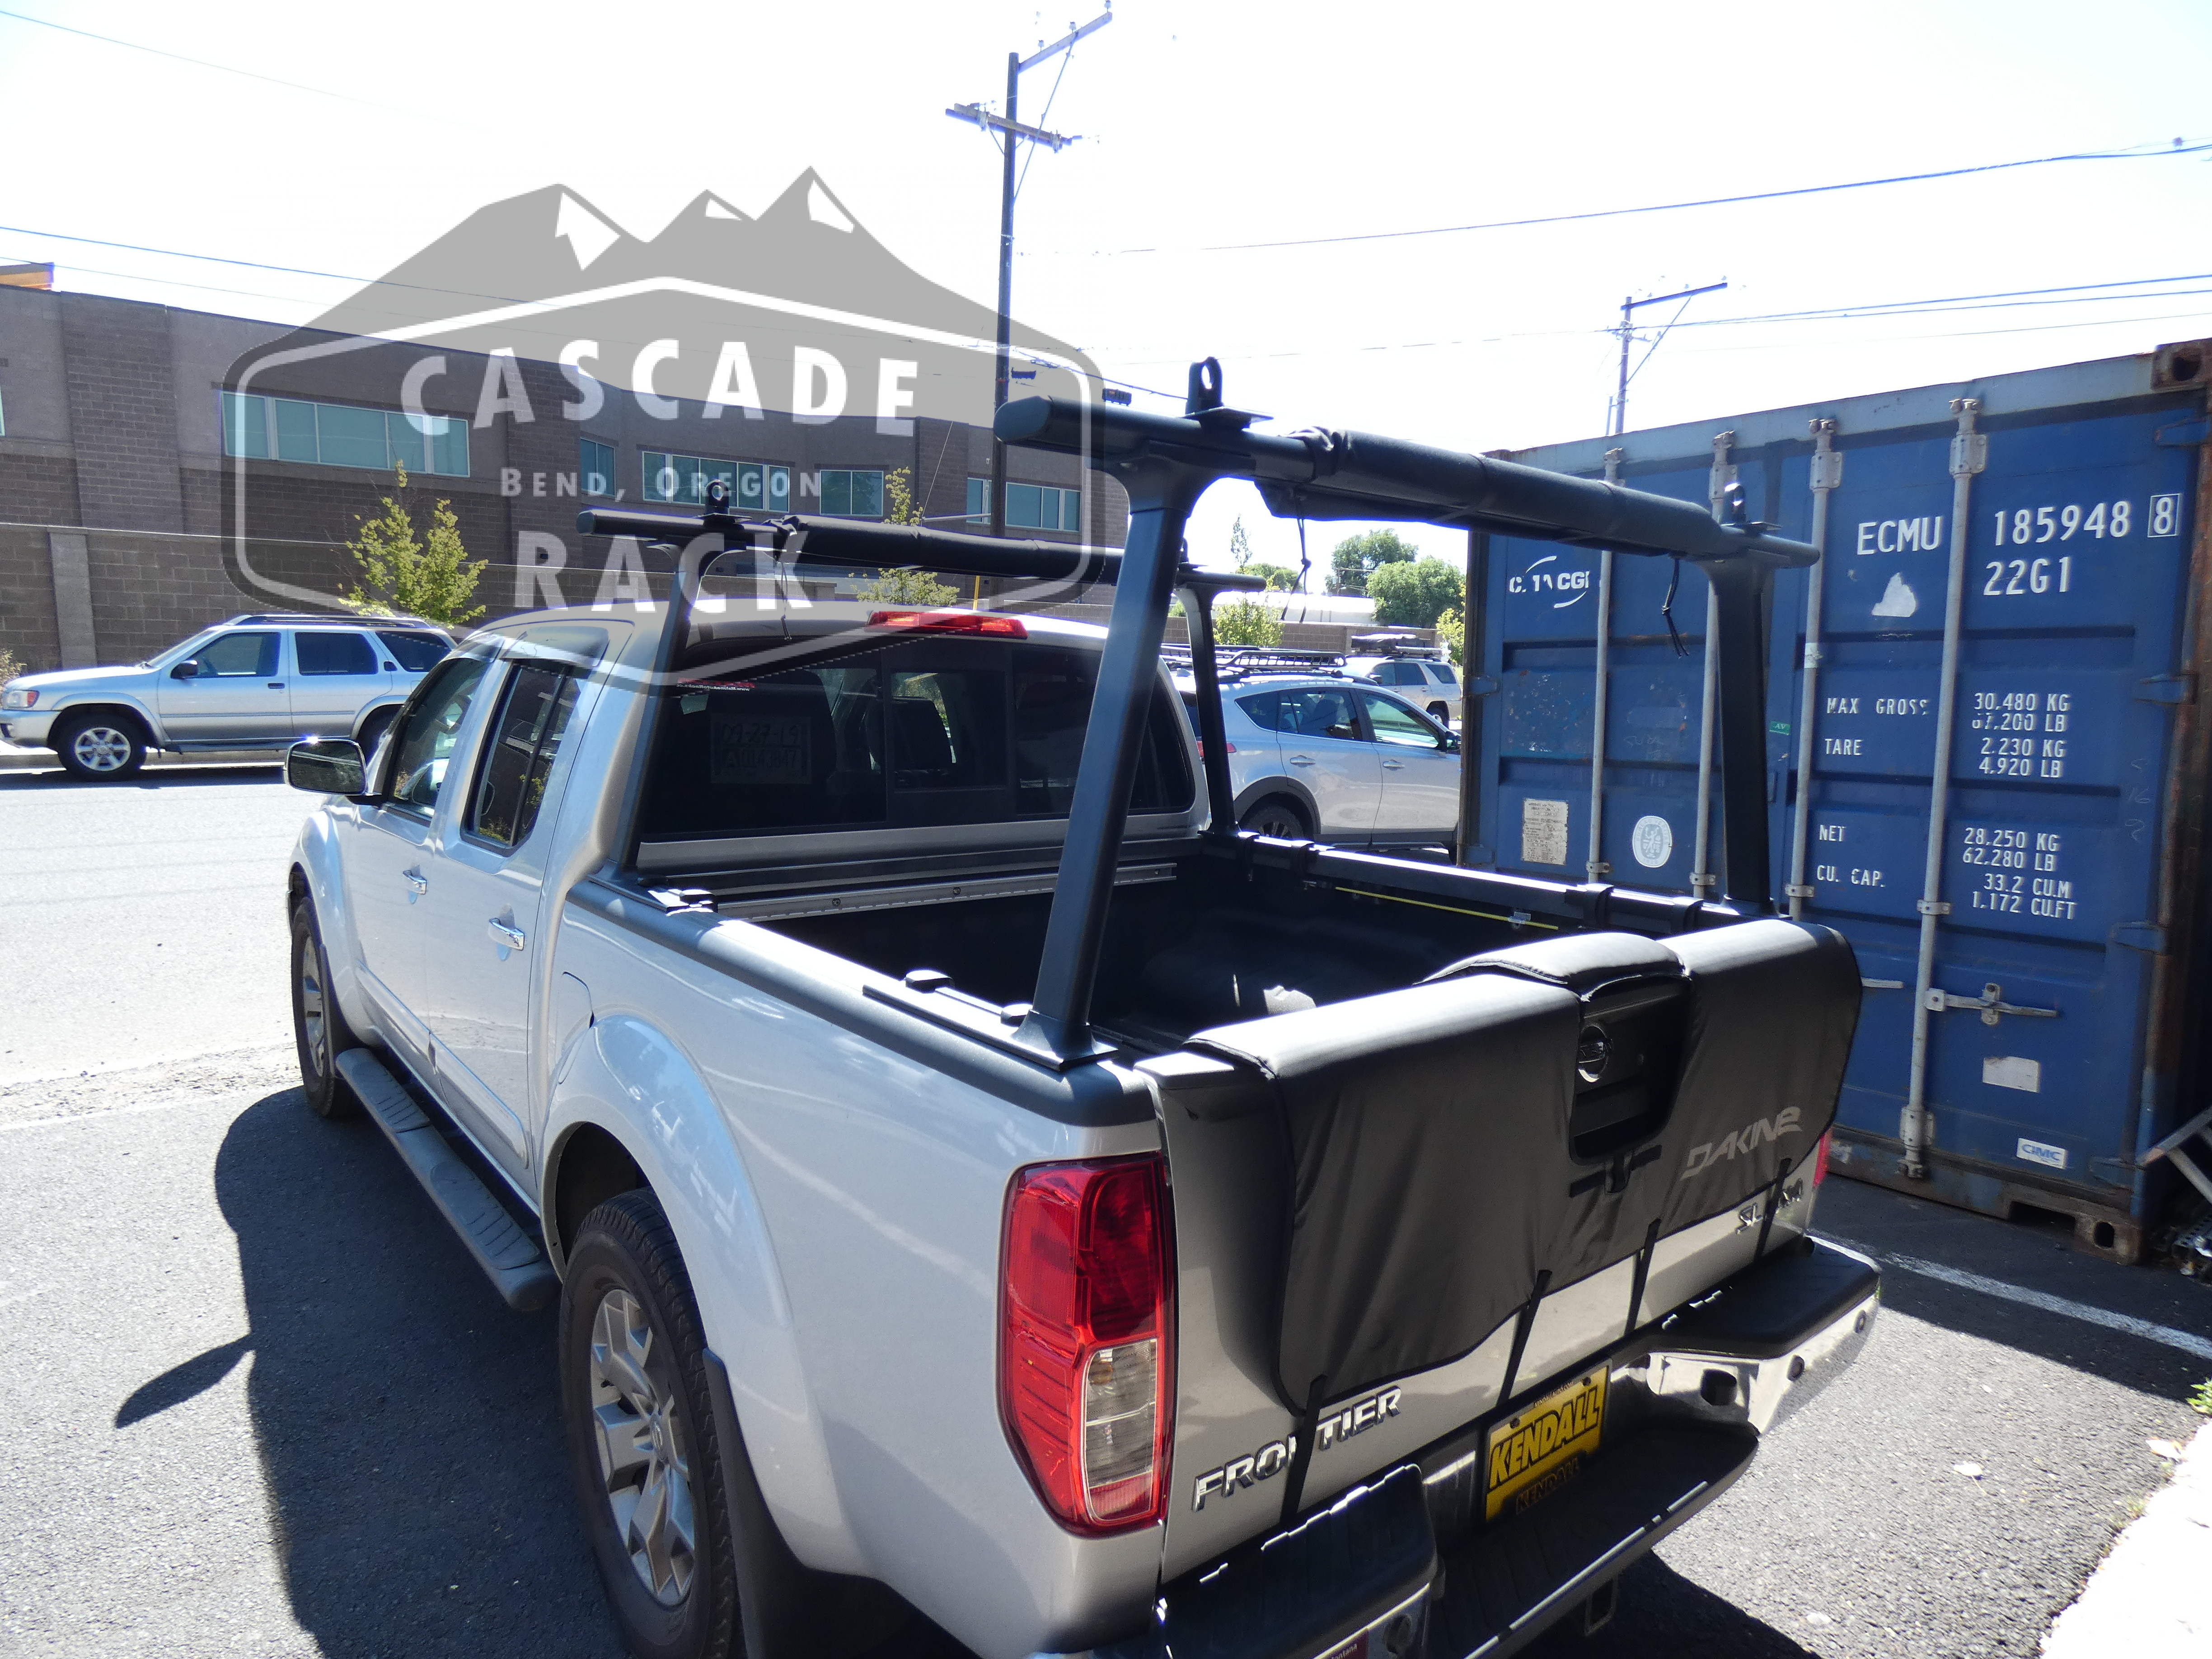 2016 Nissan Frontier - Truck Bed Rack, Kayak and Bike Pads - Thule / Malone...